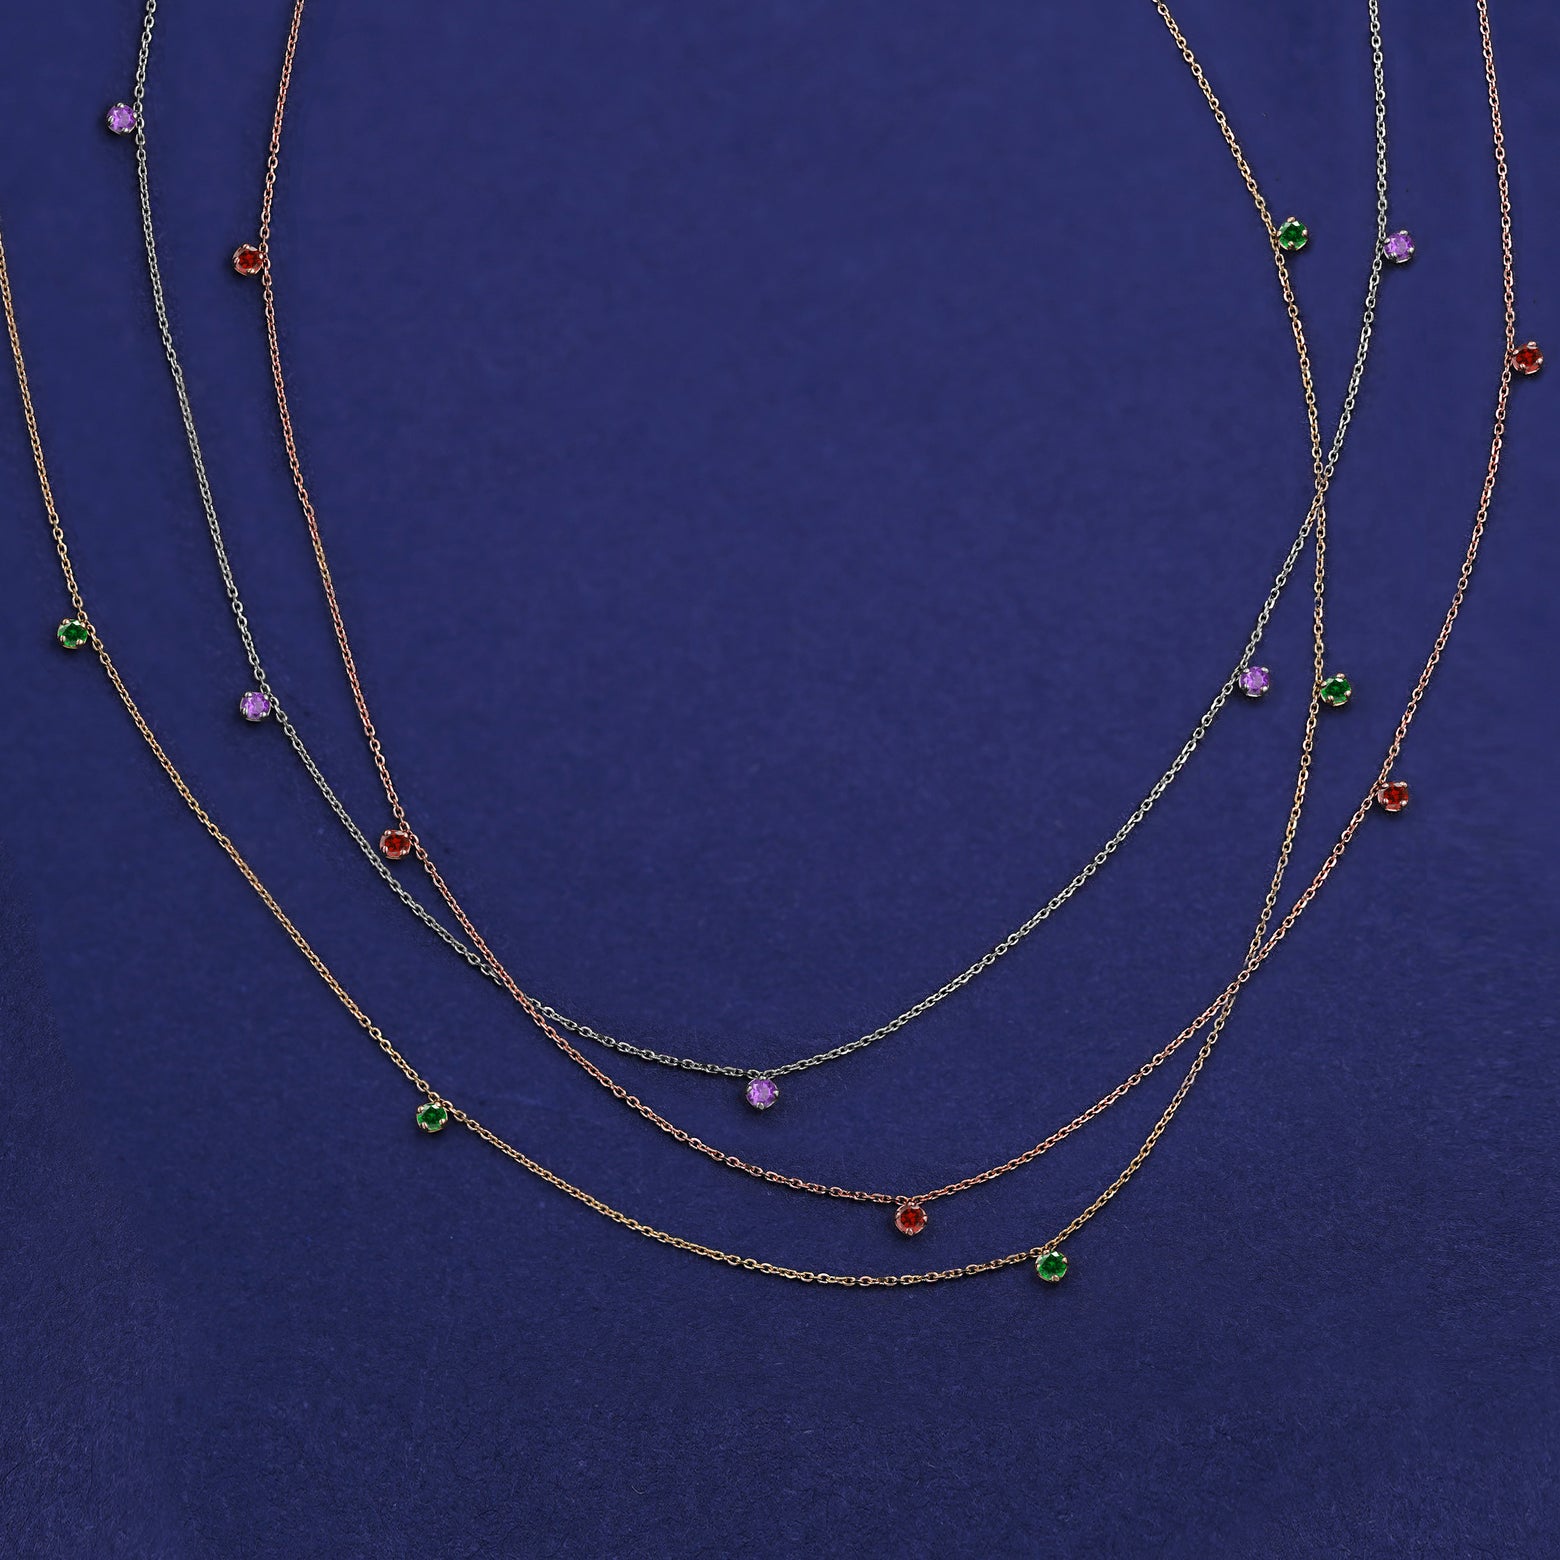 Three Five Gemstone Cable Necklaces shown in options of rose, yellow, and white gold